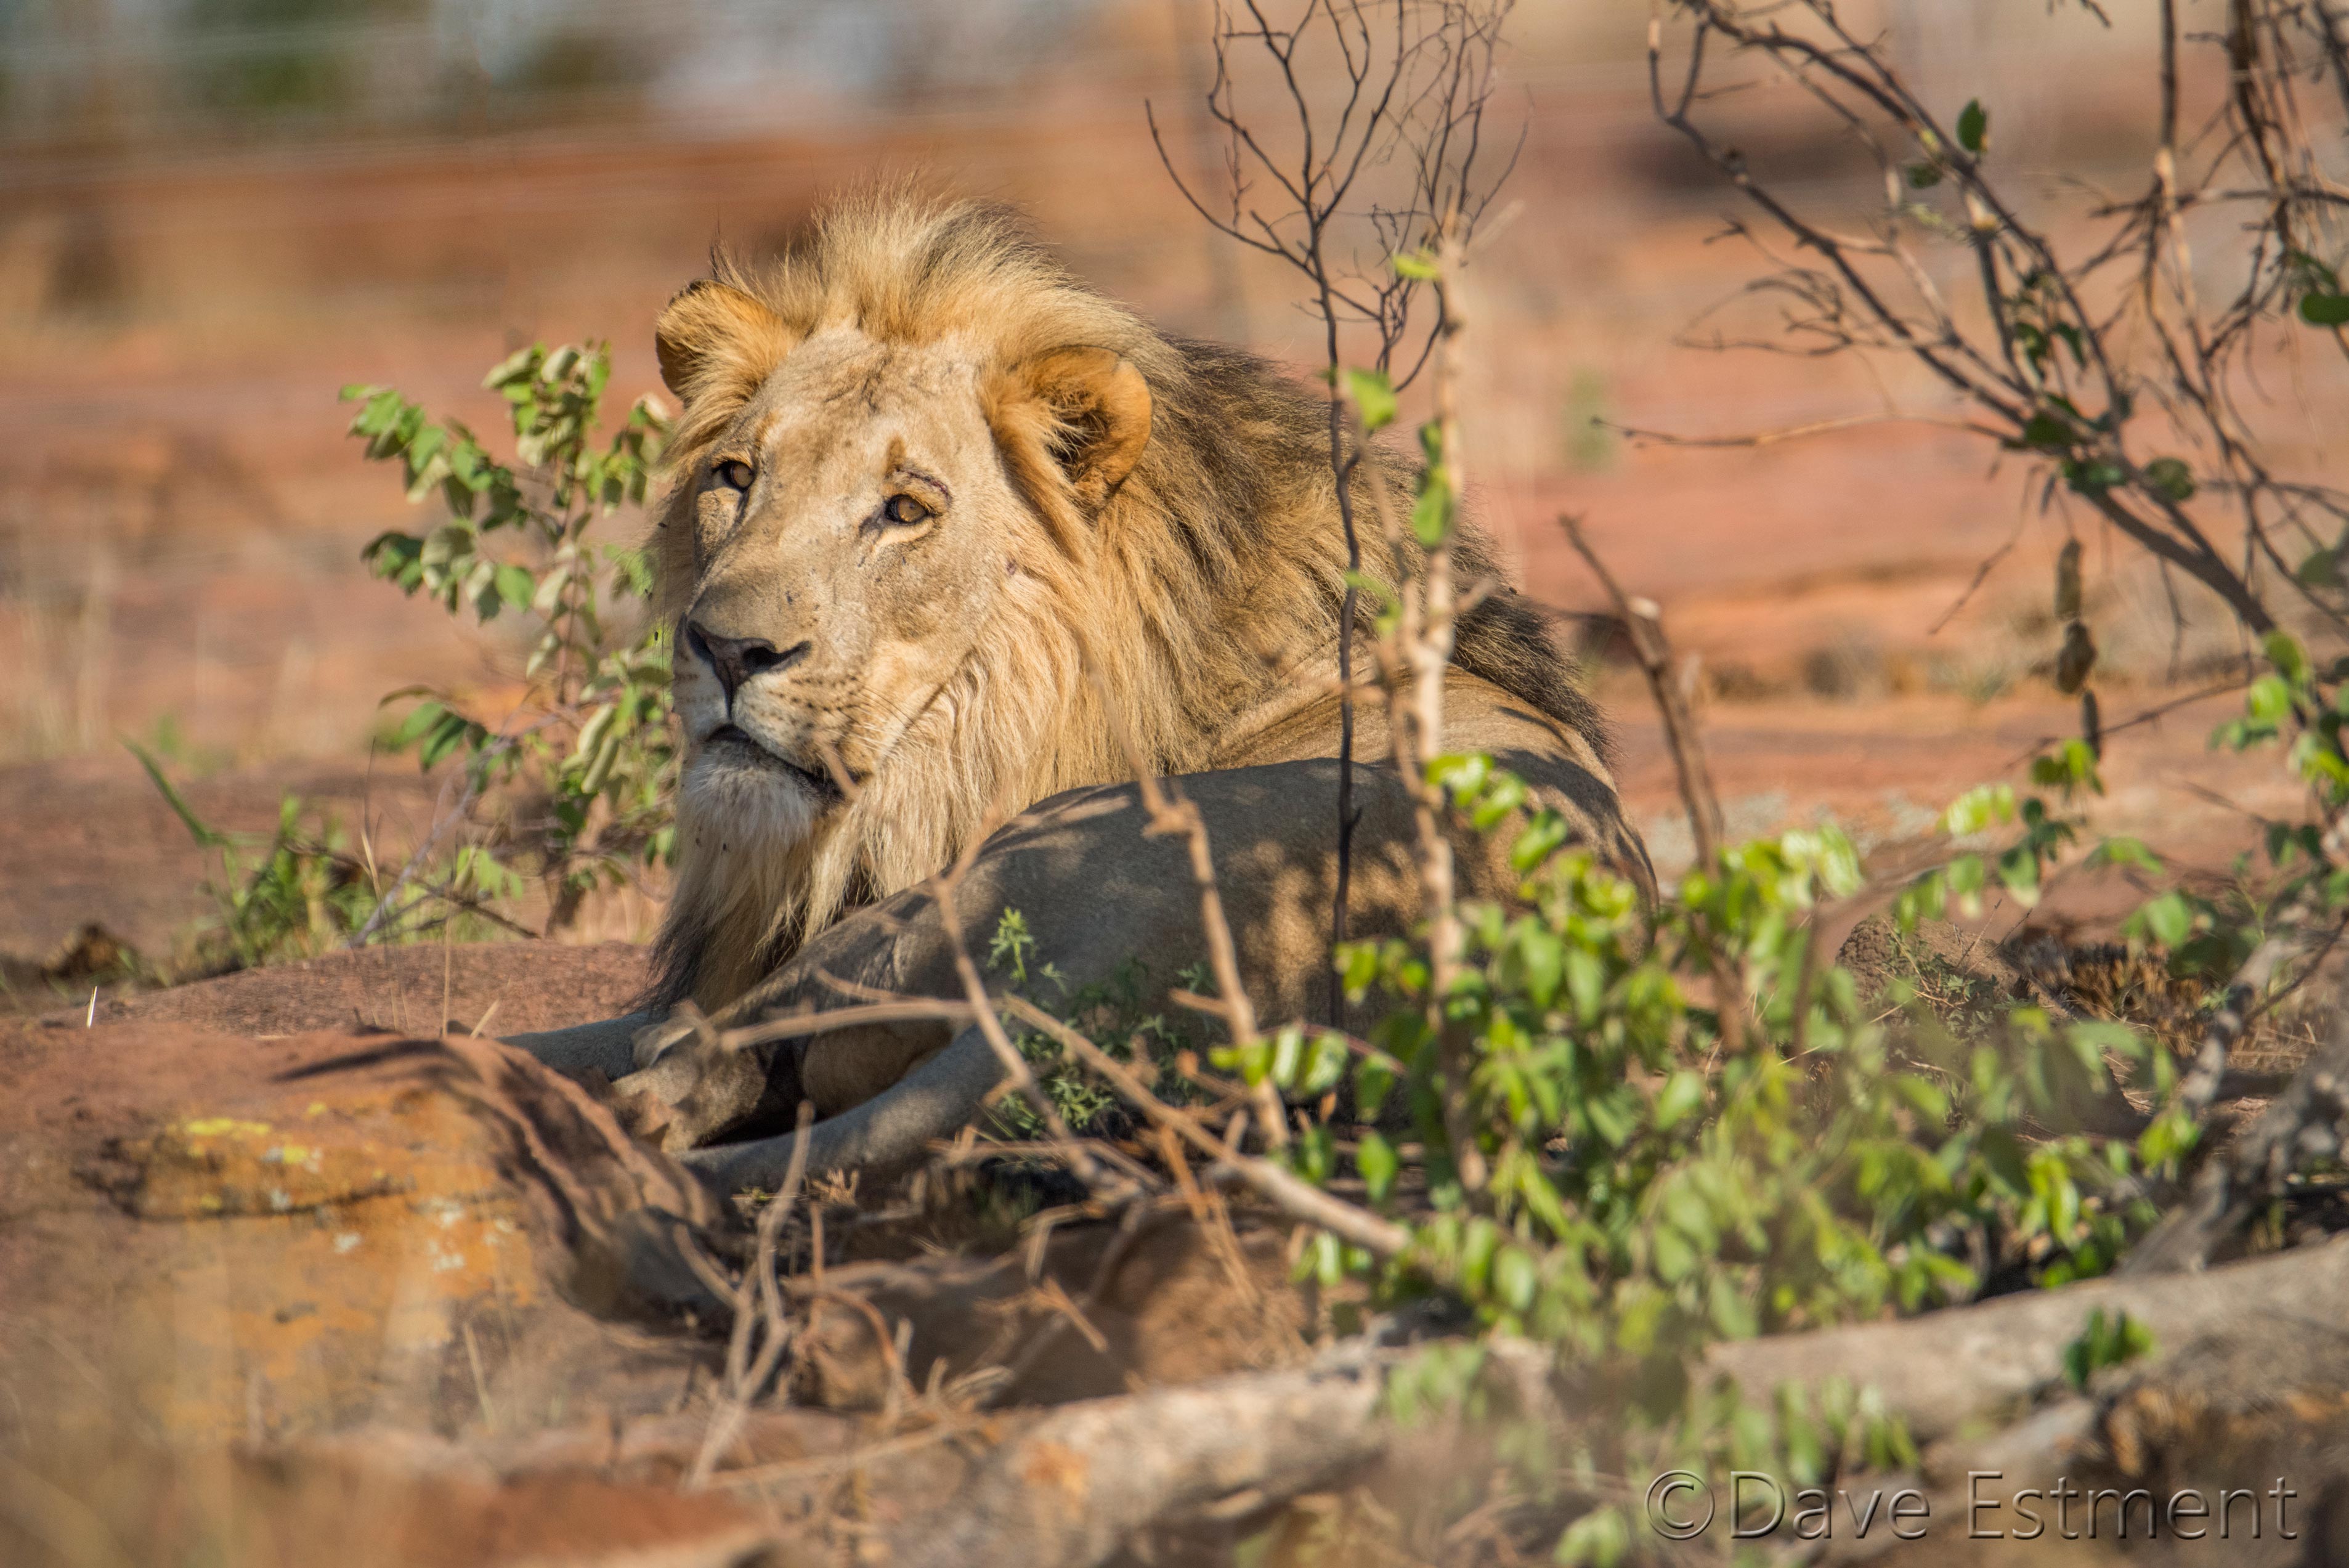 Male Lion photographed by Dave Estment of OV&P